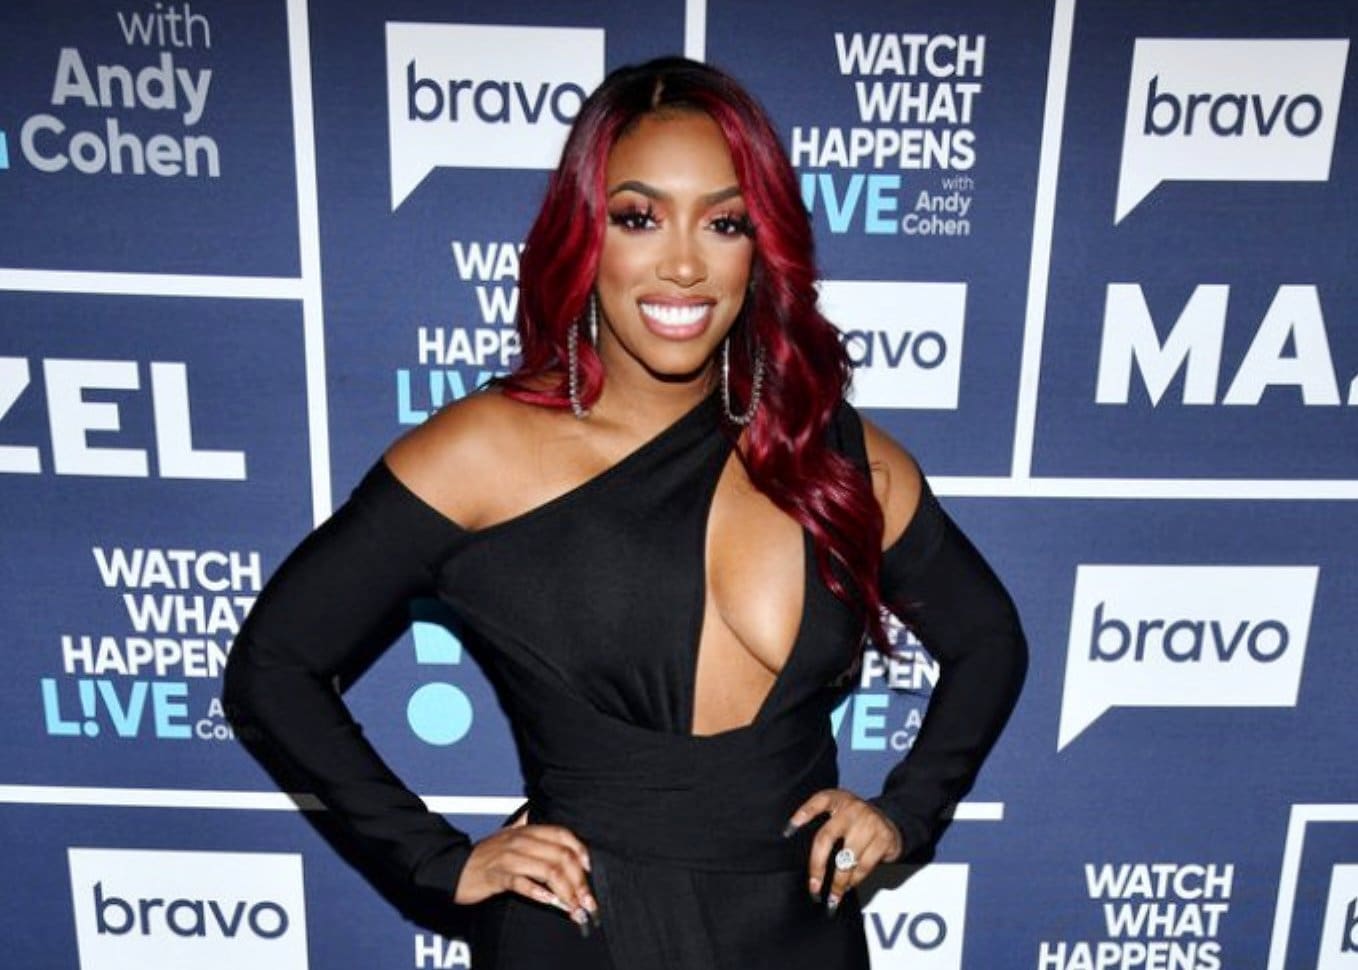 porsha-williams-shares-a-video-featuring-her-sister-lauren-williams-and-fans-appreciate-that-shes-using-her-platform